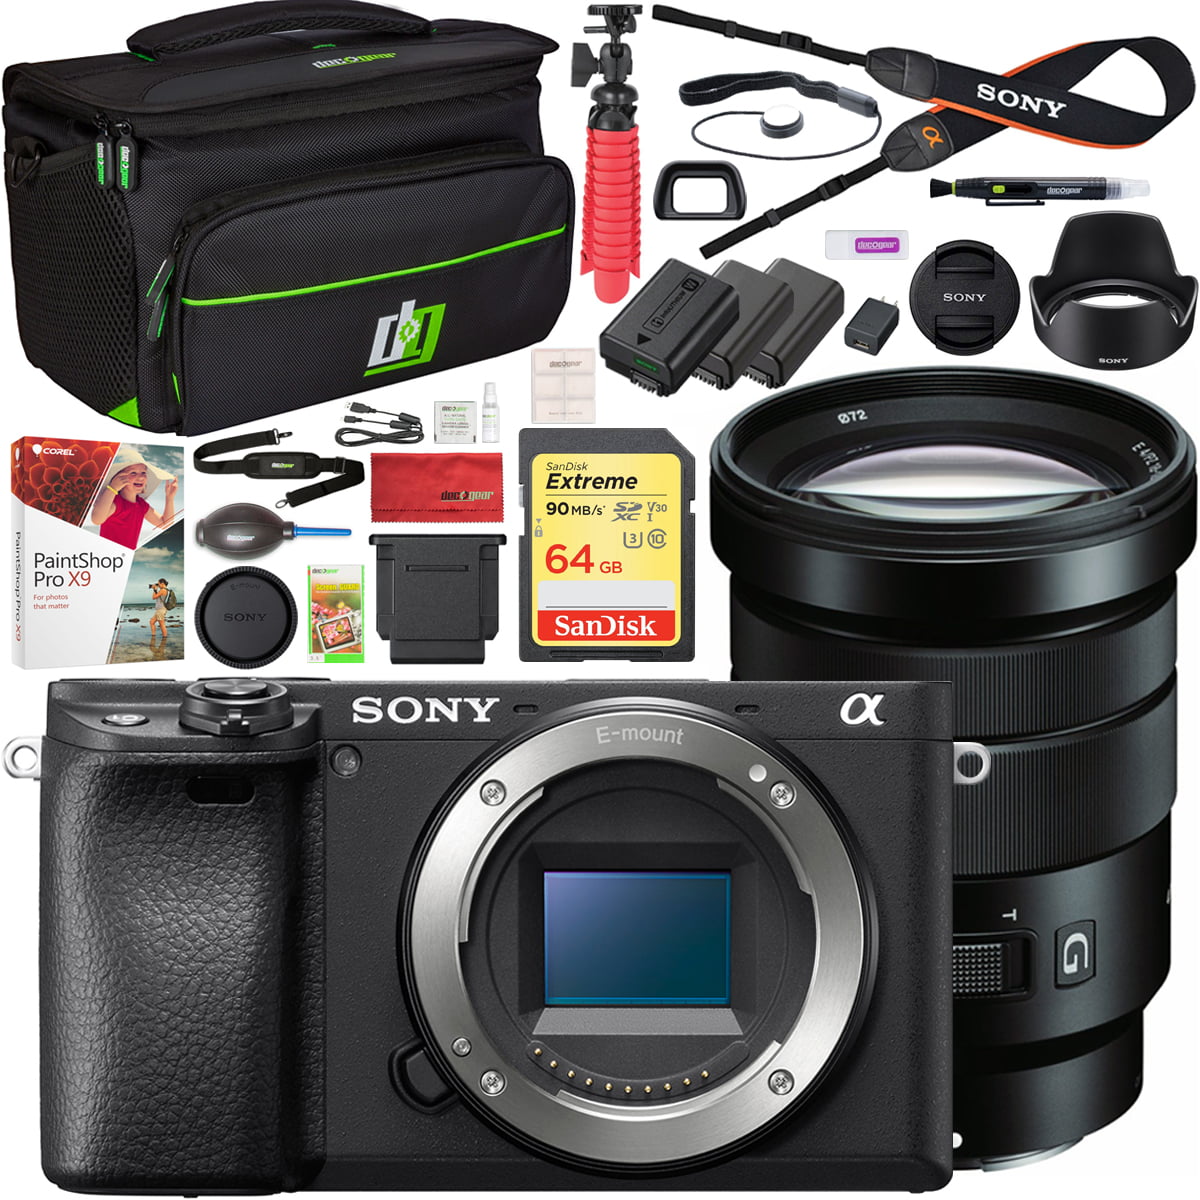 Sony a6400 4K Mirrorless Camera ILCE-6400M/B with 18-135mm F3.5-5.6 OSS Zoom Lens 64GB Memory Deco Gear Travel Case Filter Kit & Extra Battery Power Editing Bundle Black